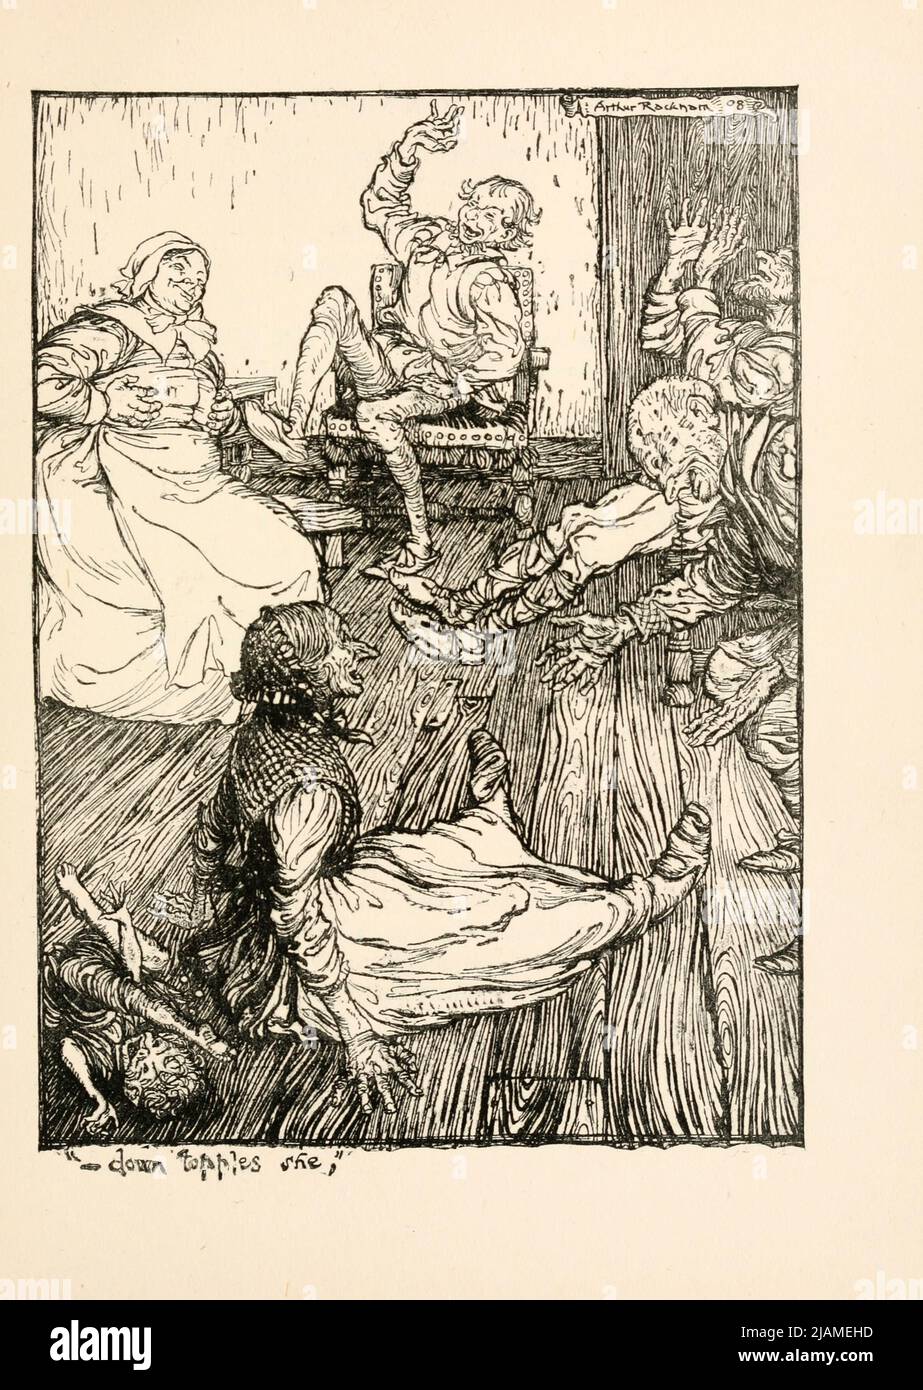 Down Topples She from ' A midsummer night's dream ' by William Shakespeare, 1564-1616; Illustrated by Arthur Rackham, 1867-1939 Publication date 1908 Publisher London, Heinemann; New York, Doubleday, Page & Co Stock Photo